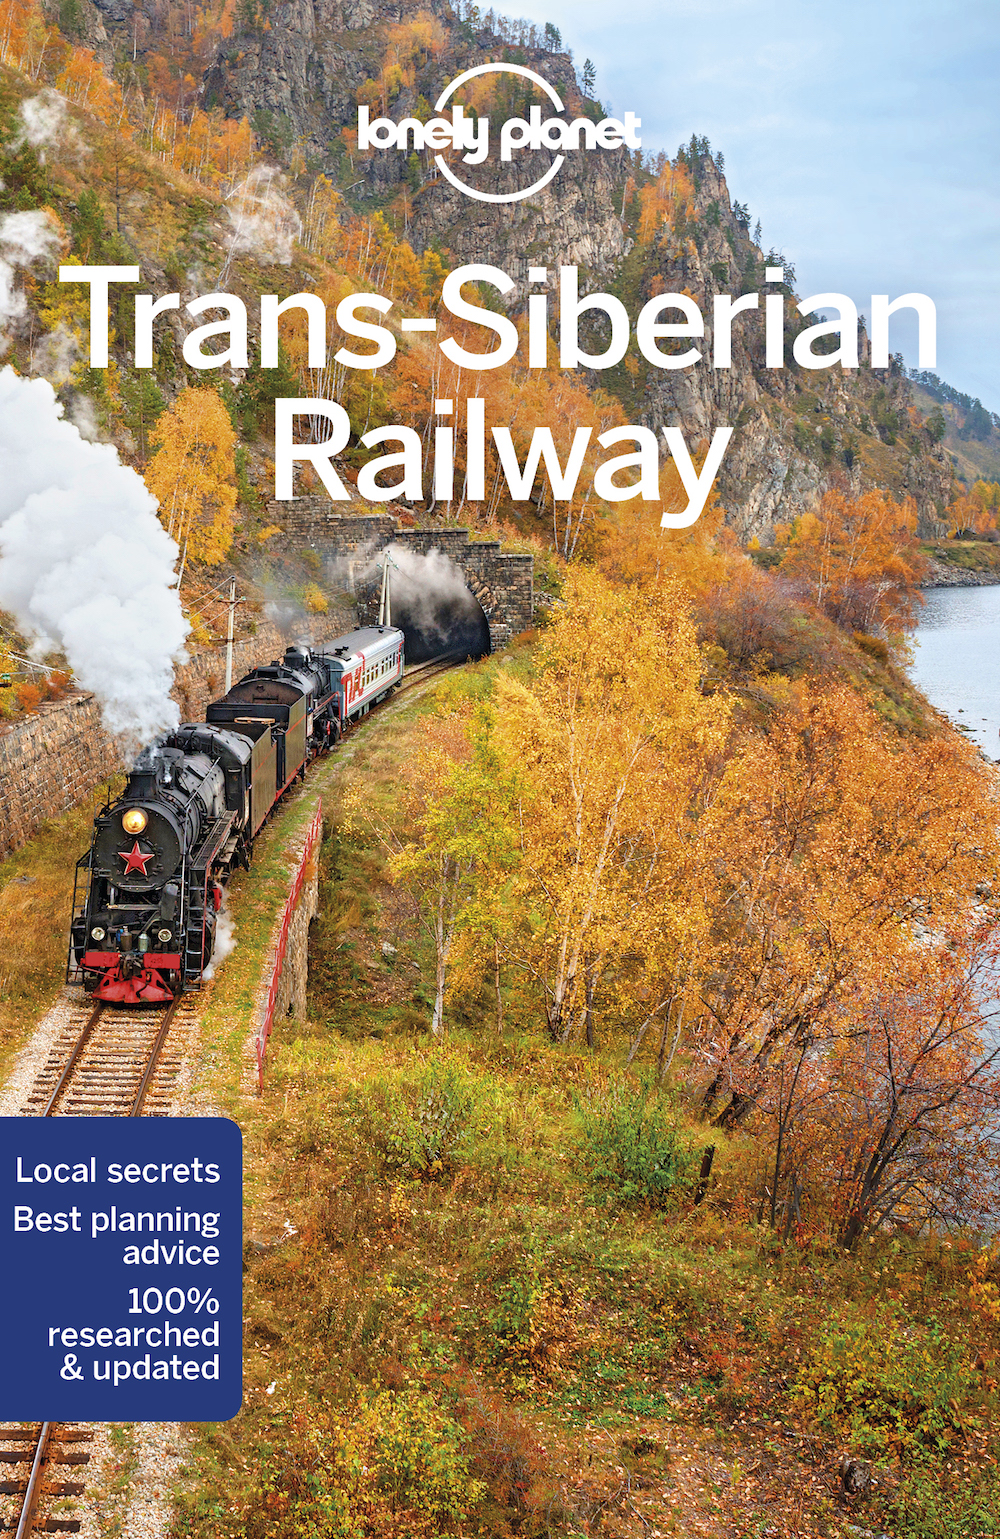 Planet　Lonely　Trans-Siberian　(9781786574596)　Railway　by　Lonely　Planet